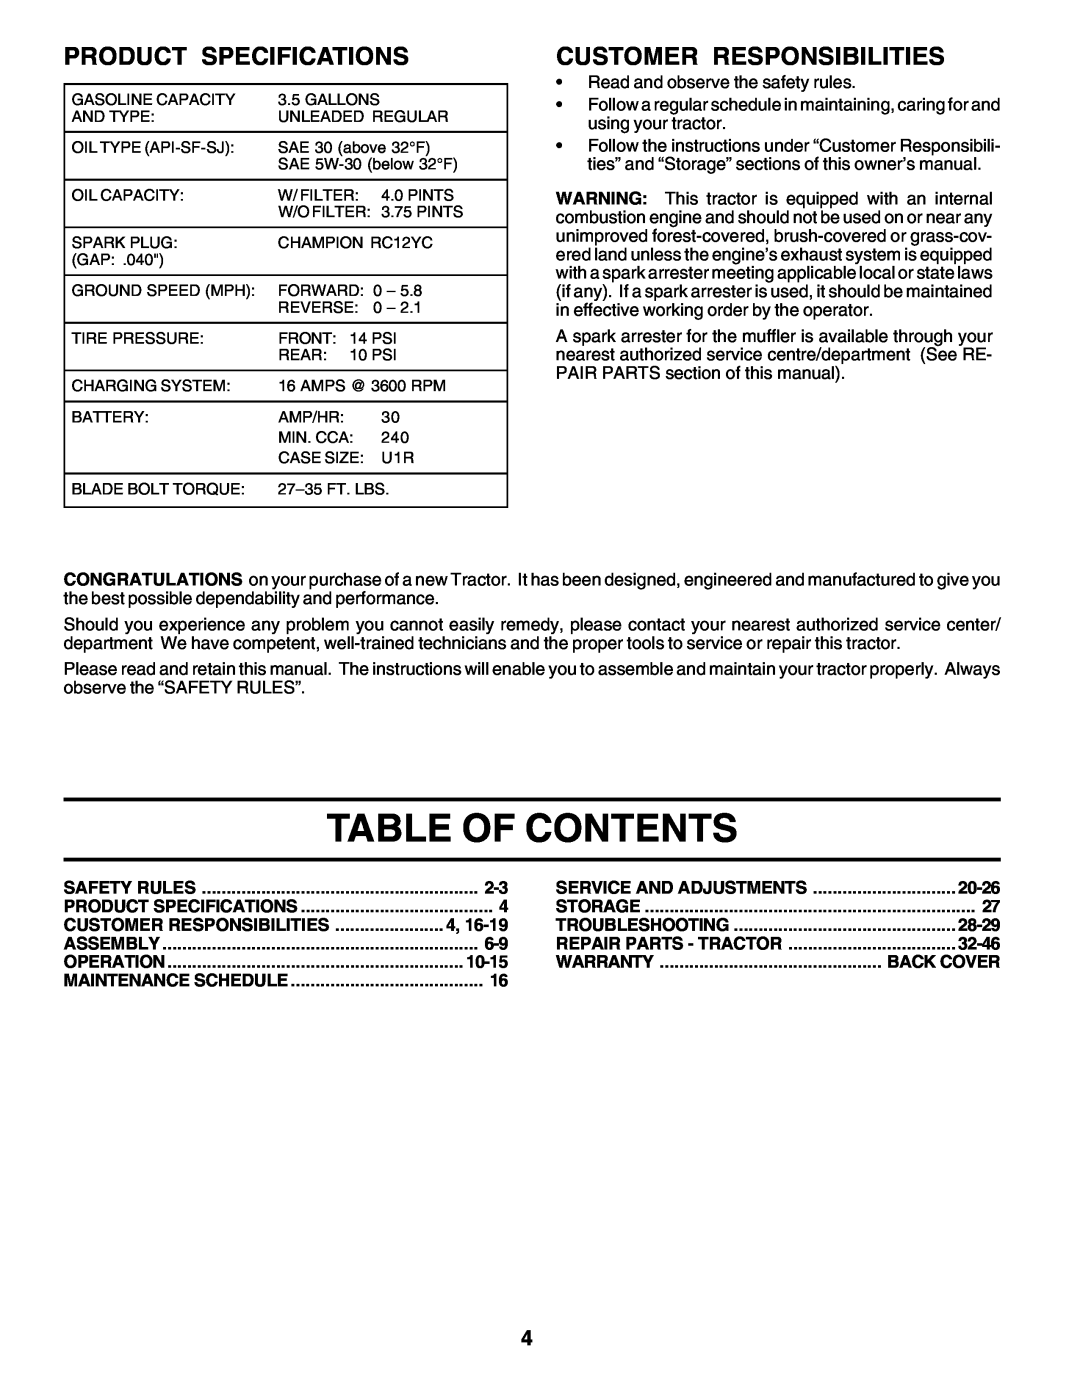 Poulan PRGT22H50C owner manual Table Of Contents, Product Specifications, Customer Responsibilities 